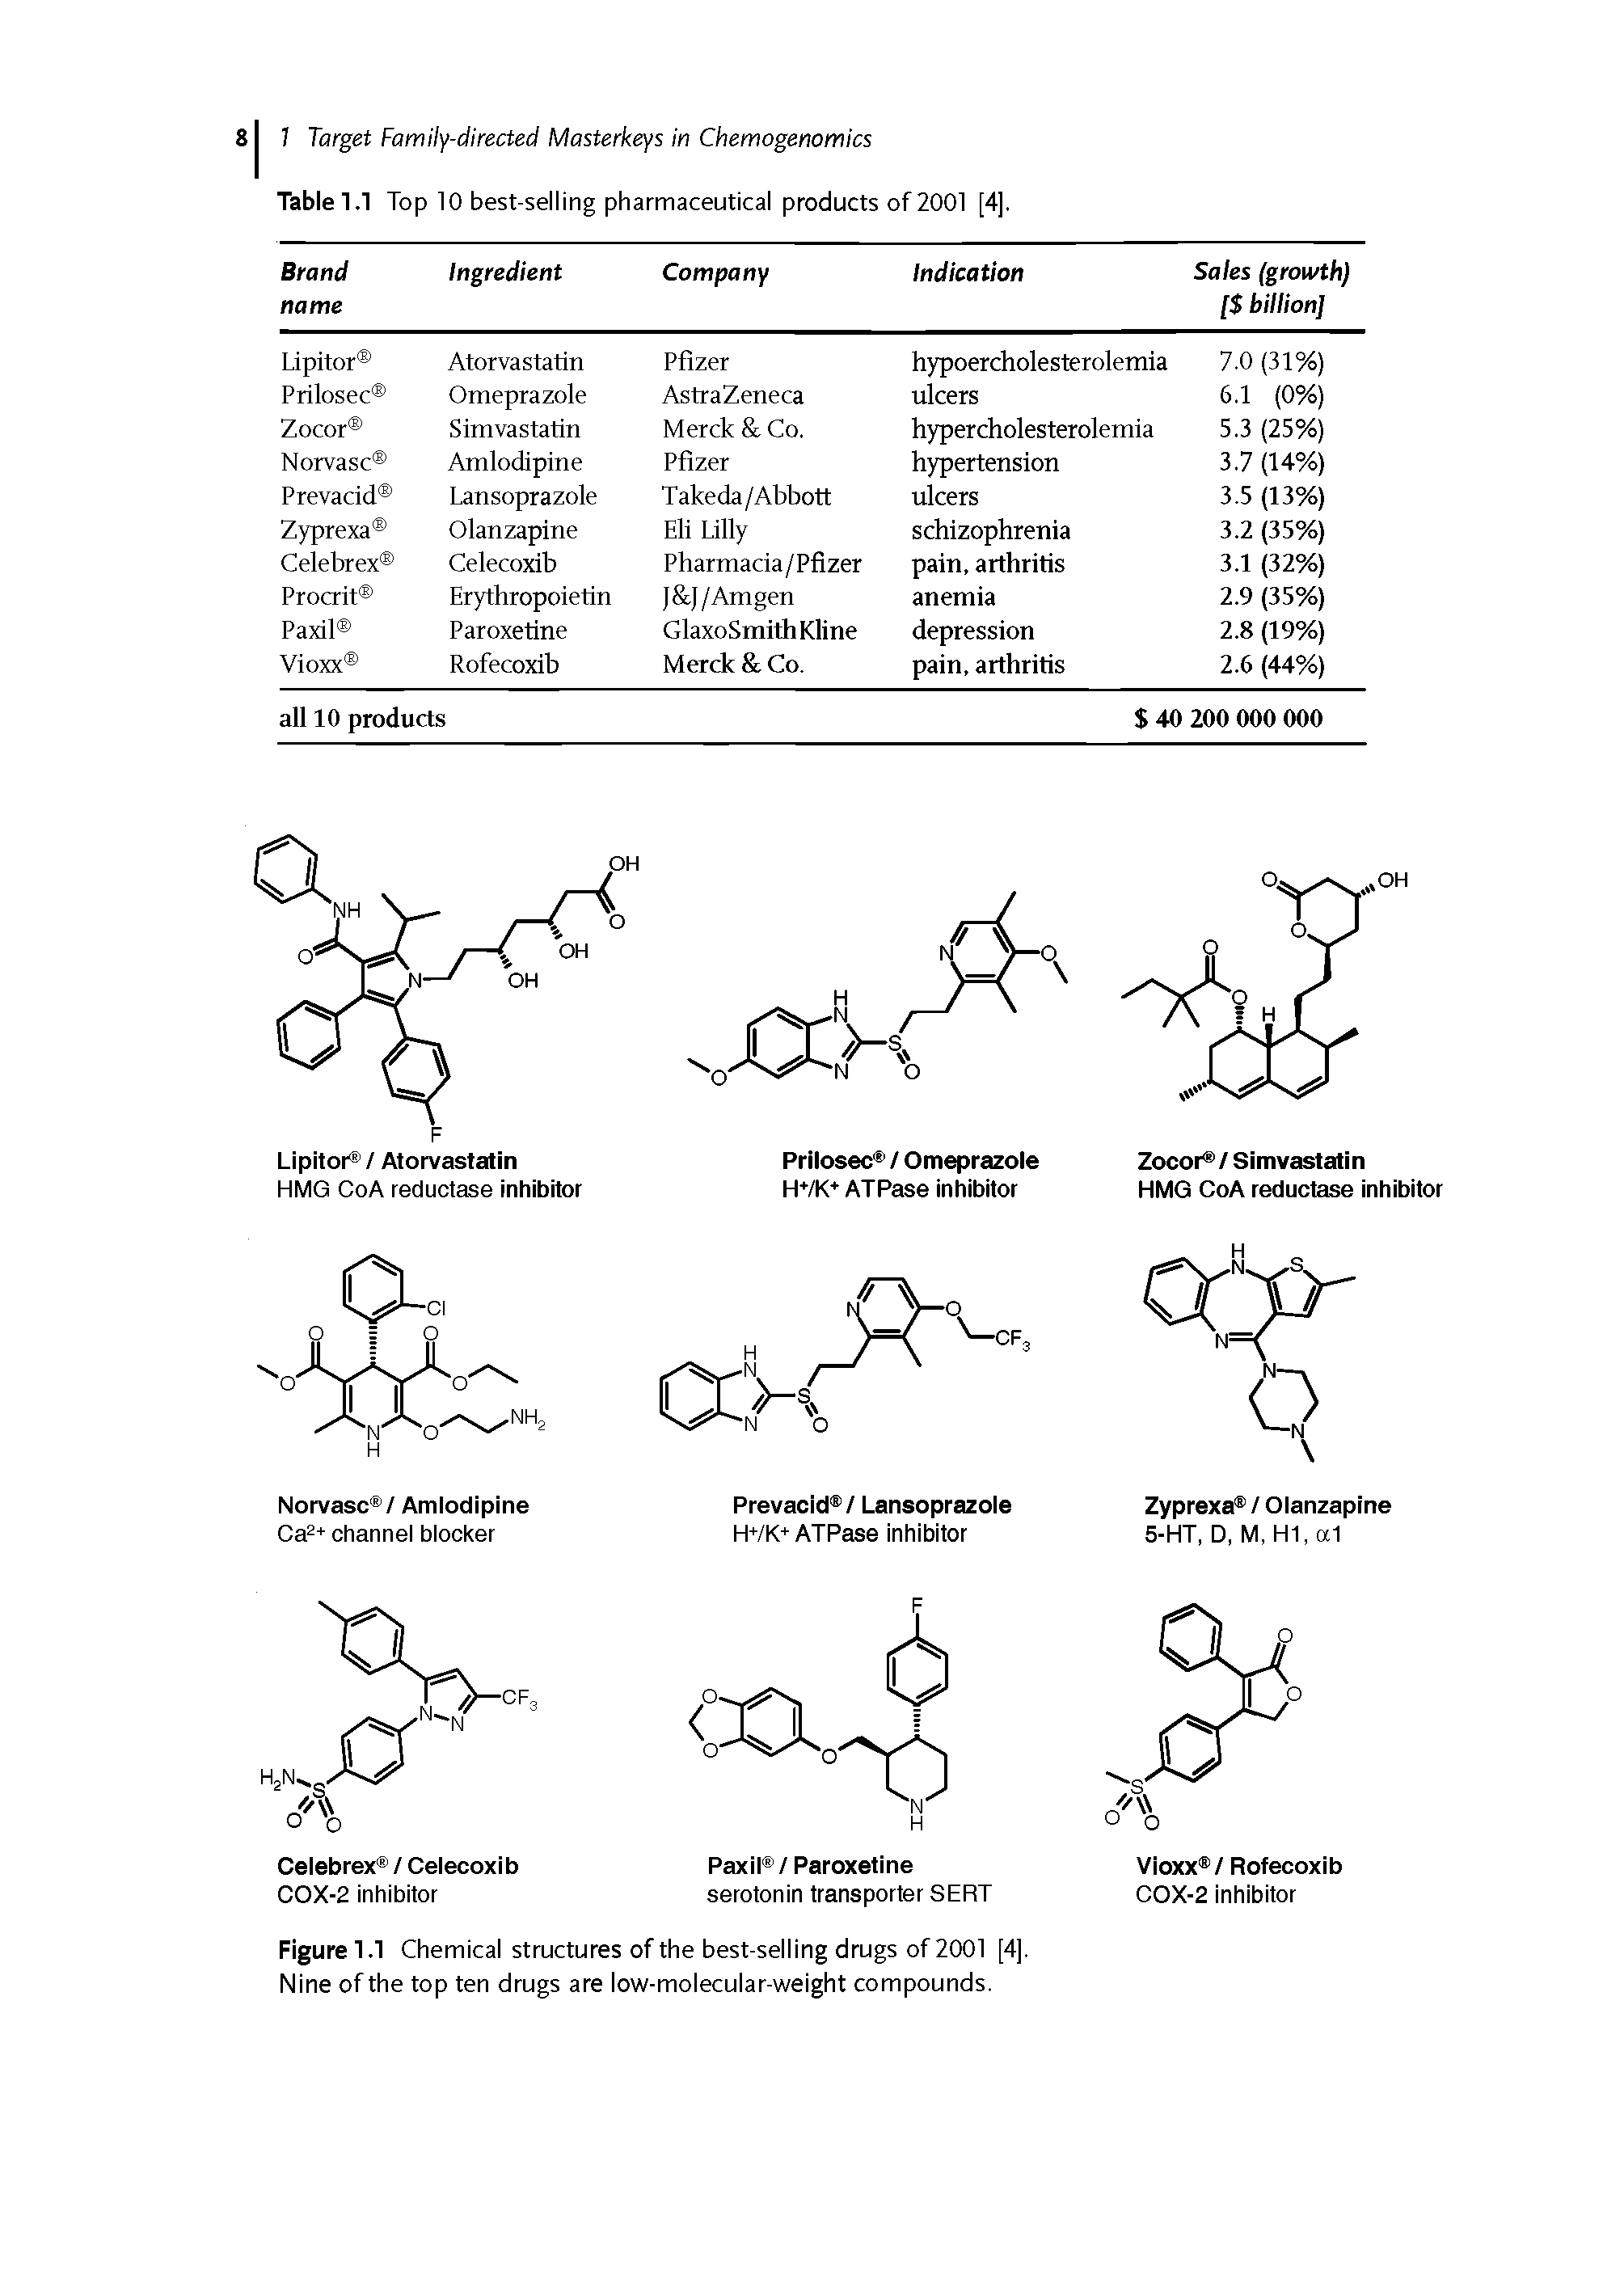 Figurel.1 Chemical structures of the best-selling drugs of 2001 [4], Nine of the top ten drugs are low-molecular-weight compounds.